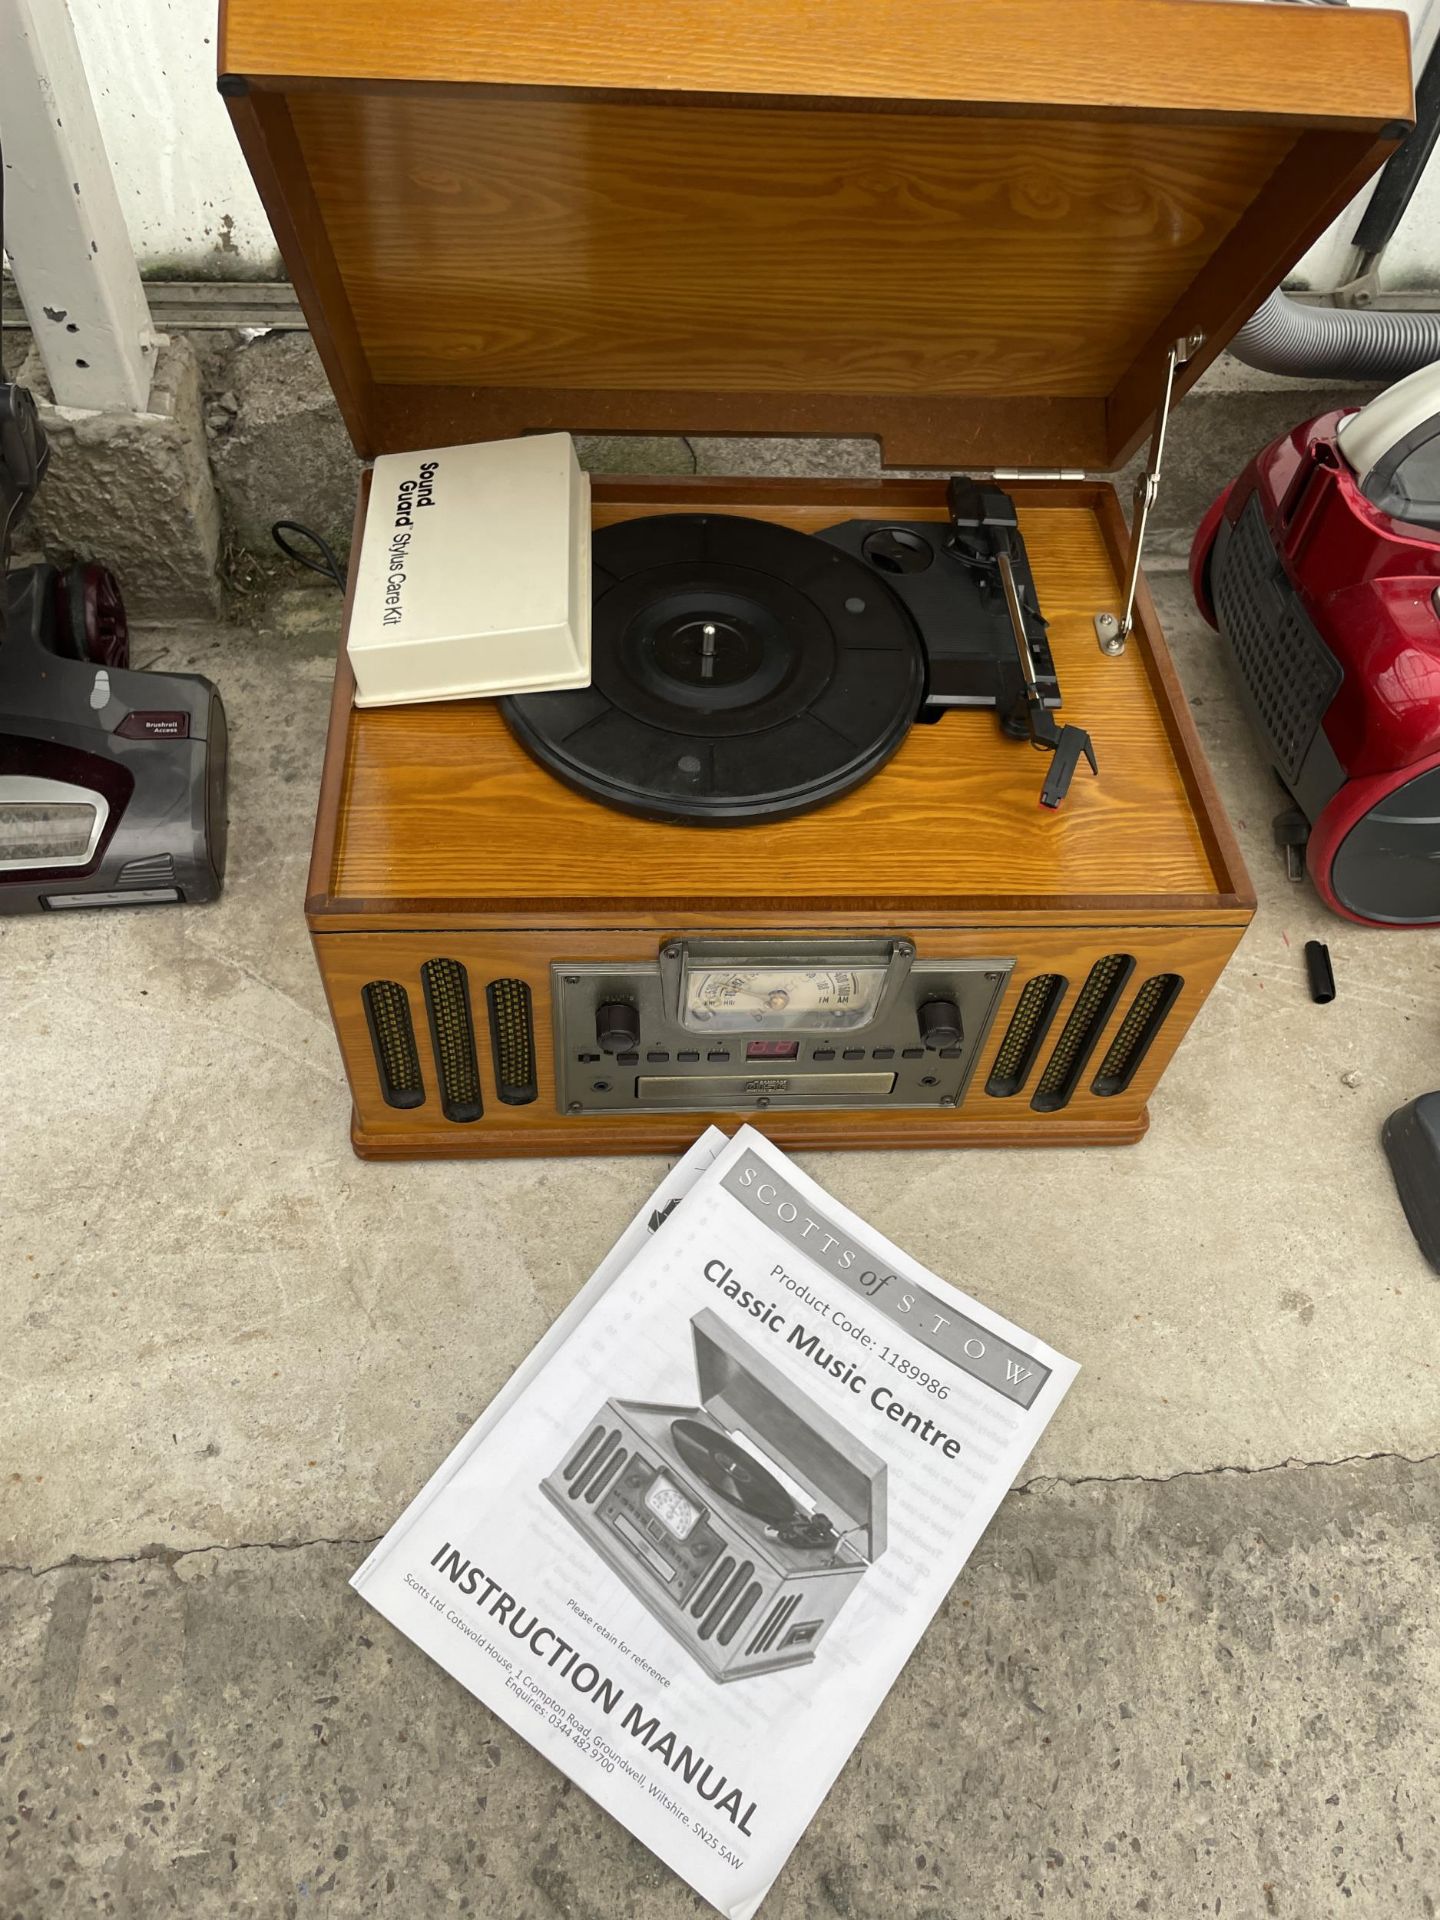 A RETRO ELECTRIC PORTABLE RECORD PLAYER - Image 2 of 3